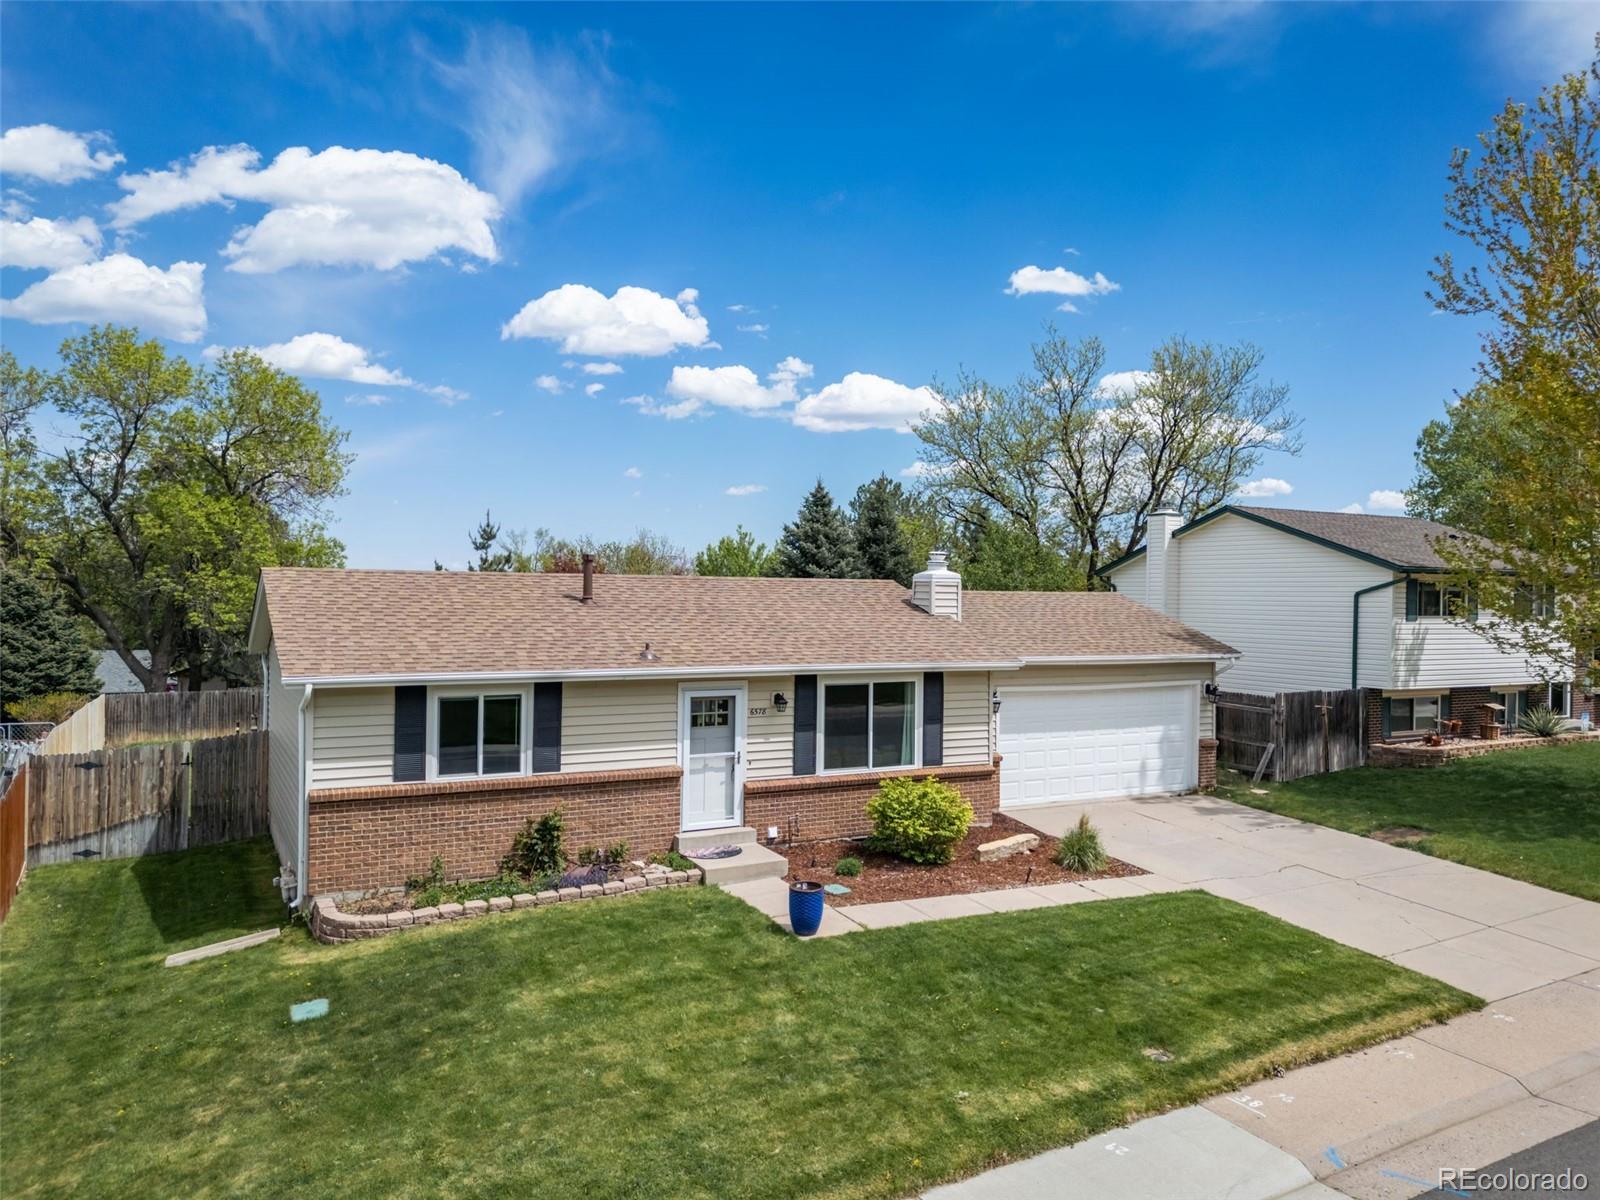 Report Image for 6578 S Garland Way,Littleton, Colorado